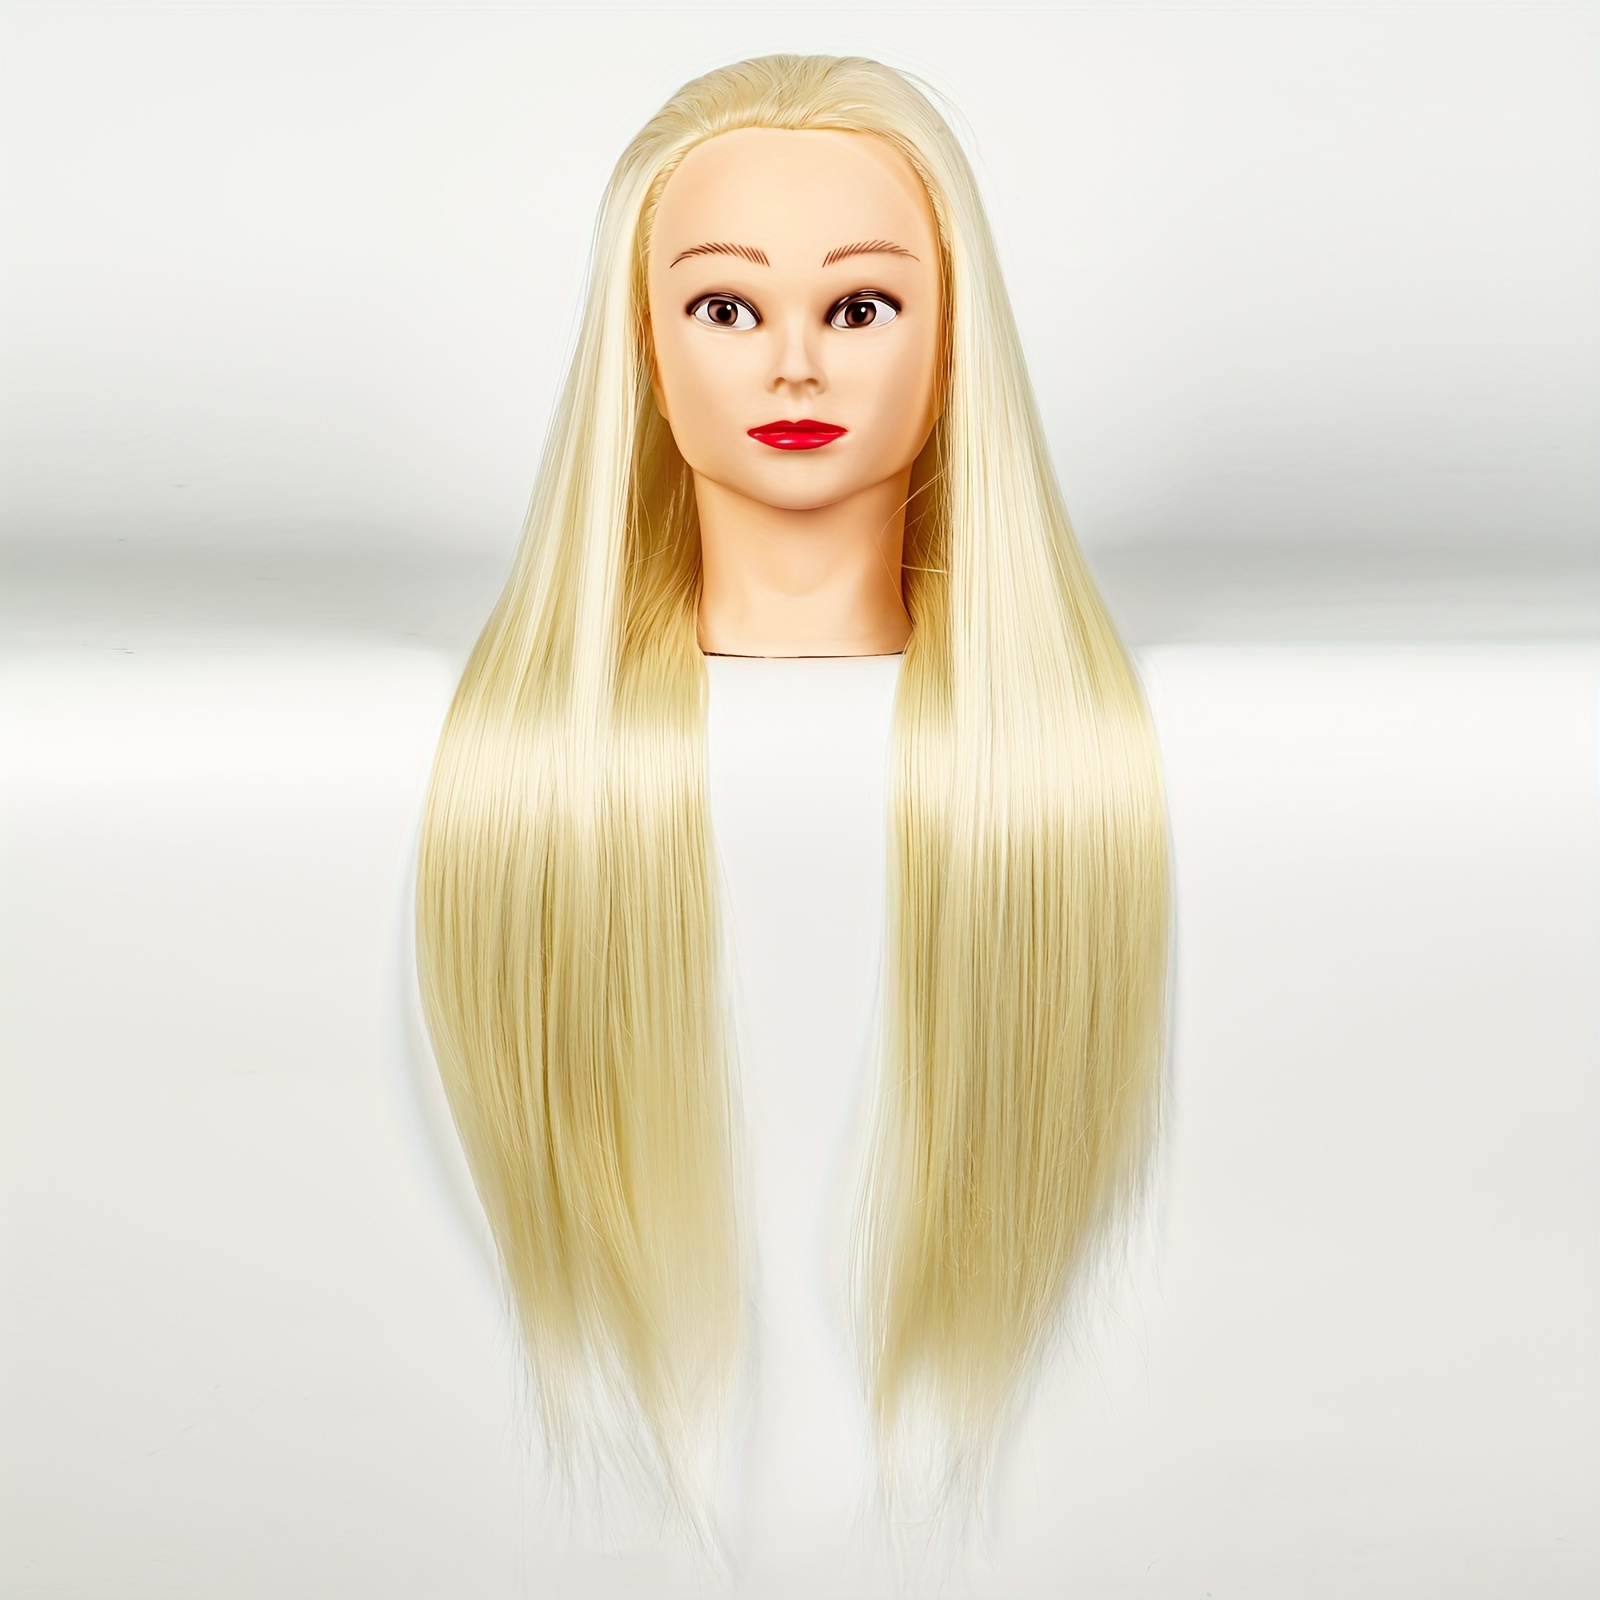 

Blonde Mannequin Head With Hair, Hair Mannequins To Practice On, Doll Head For Hair Styling, Mannequin Heads With Hair For Makeup Practice, Manikin Head Cosmetology